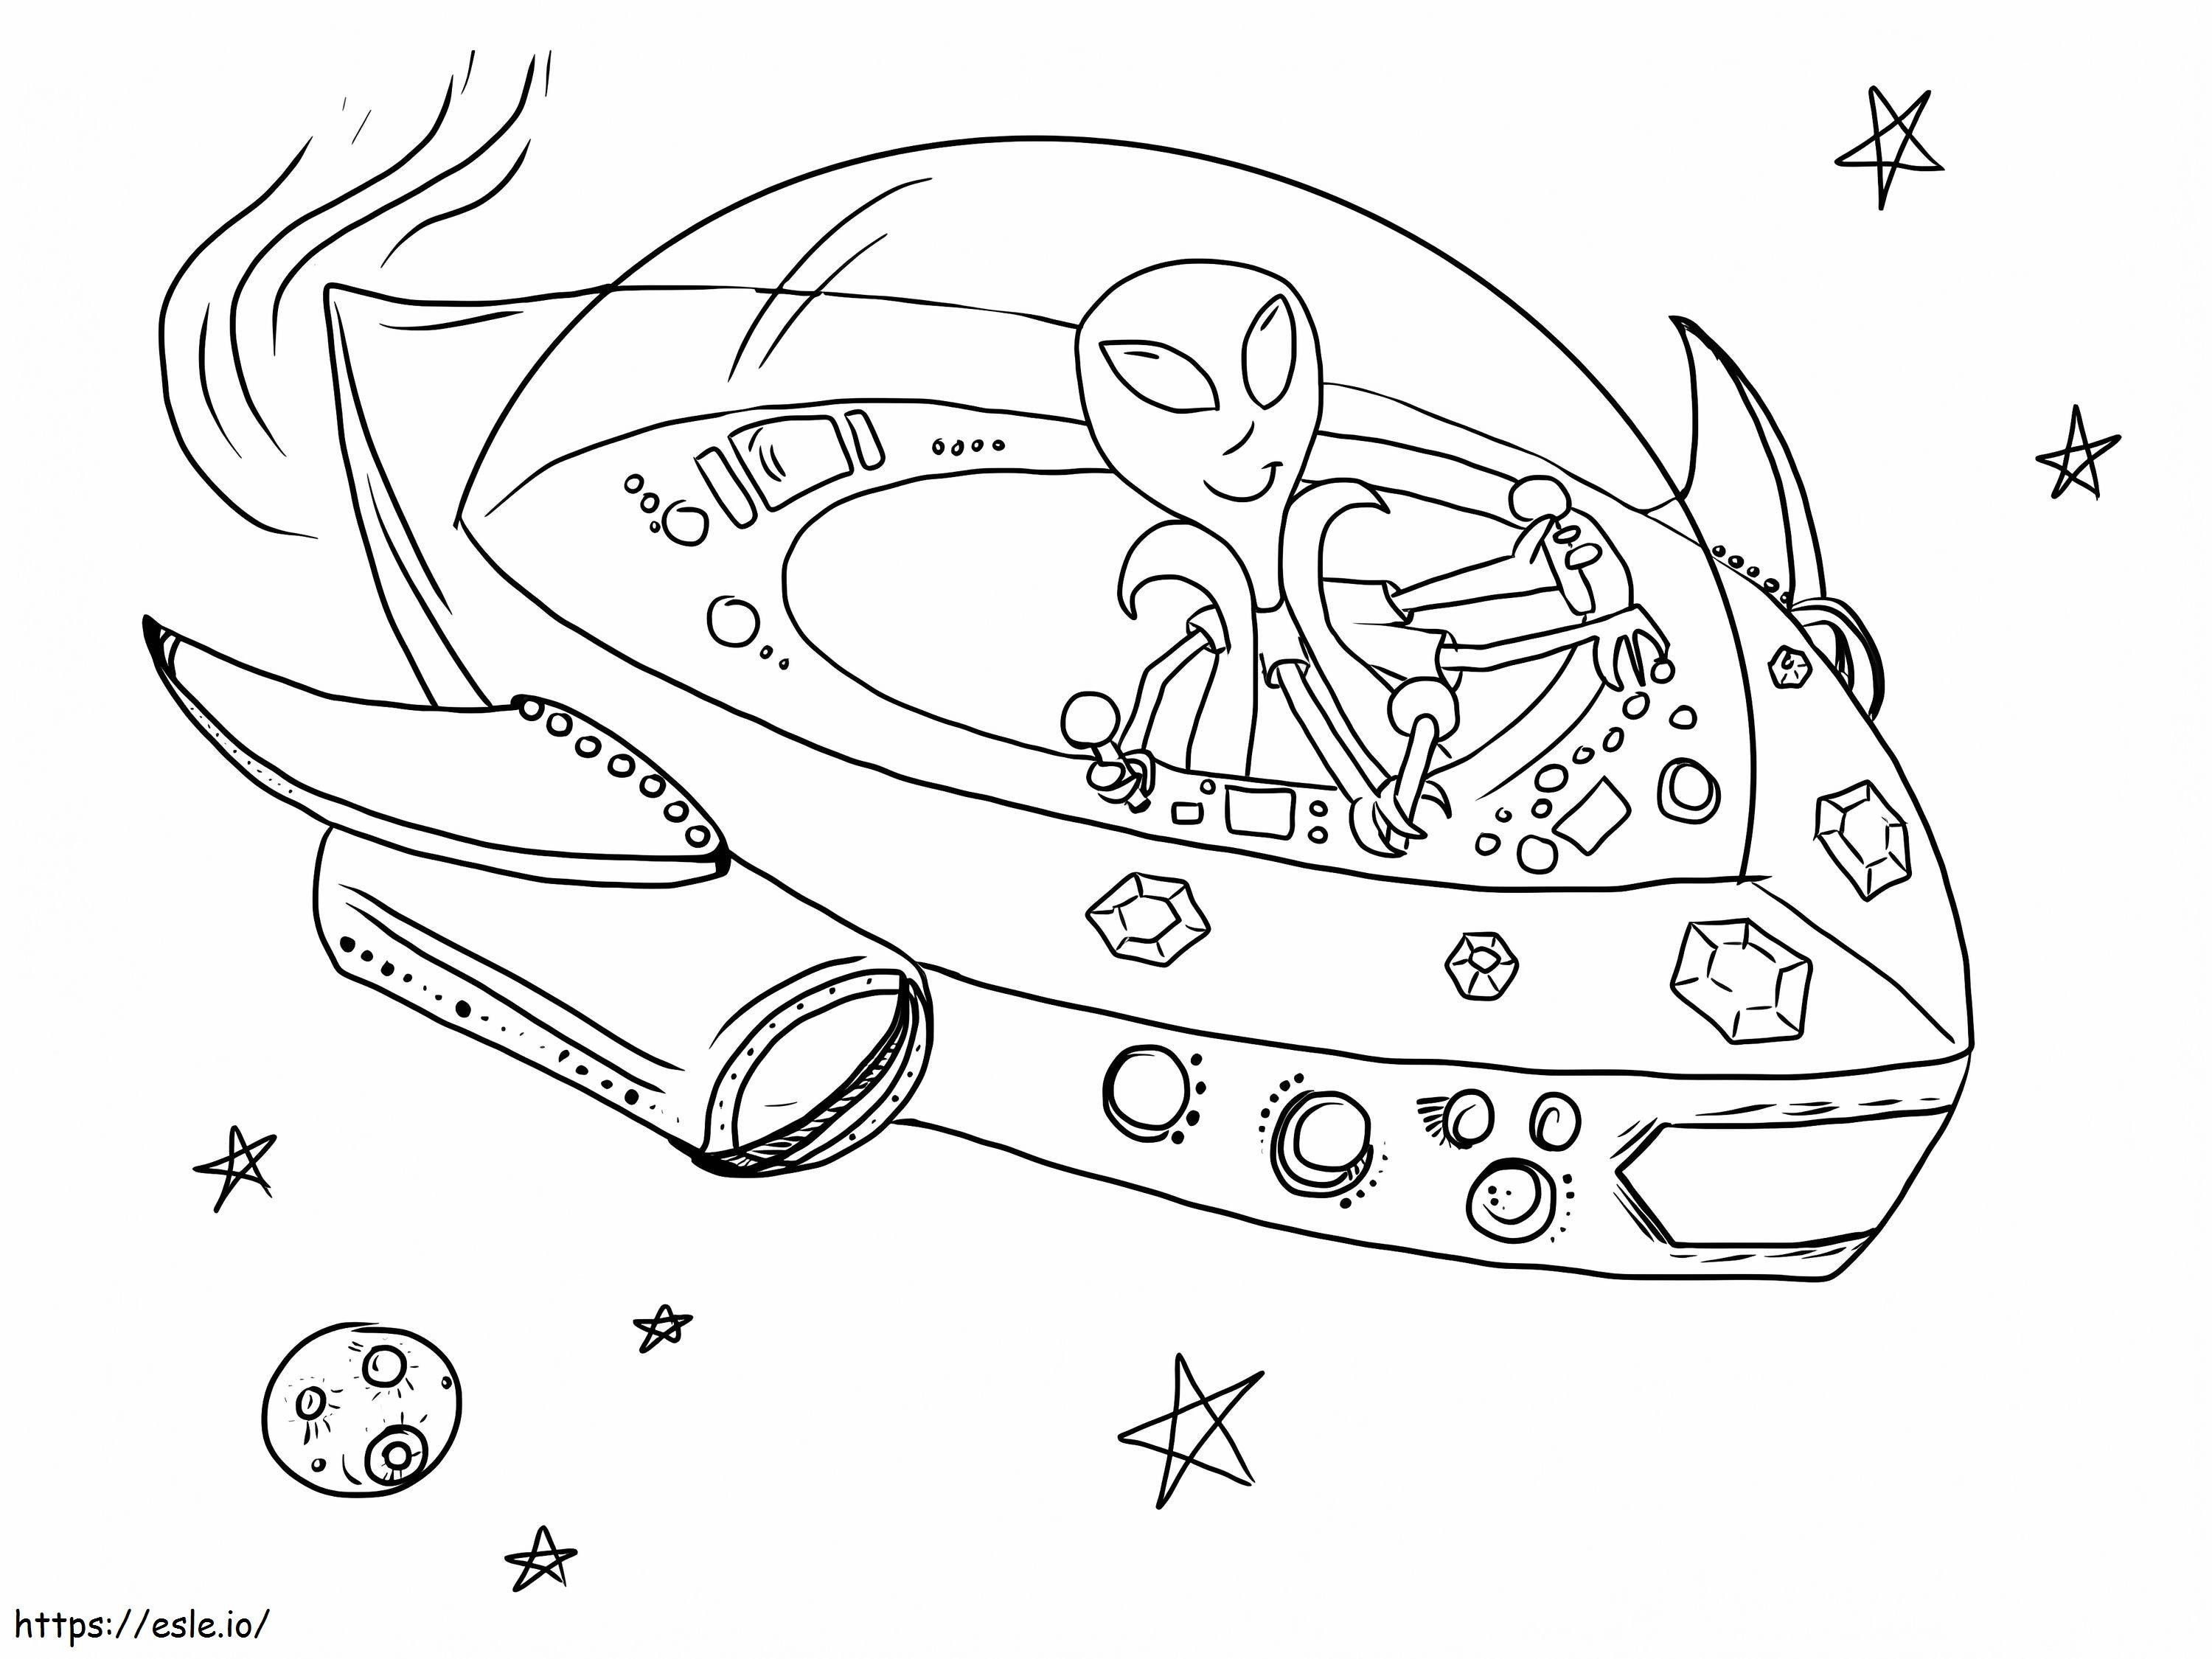 Alien In UFO coloring page